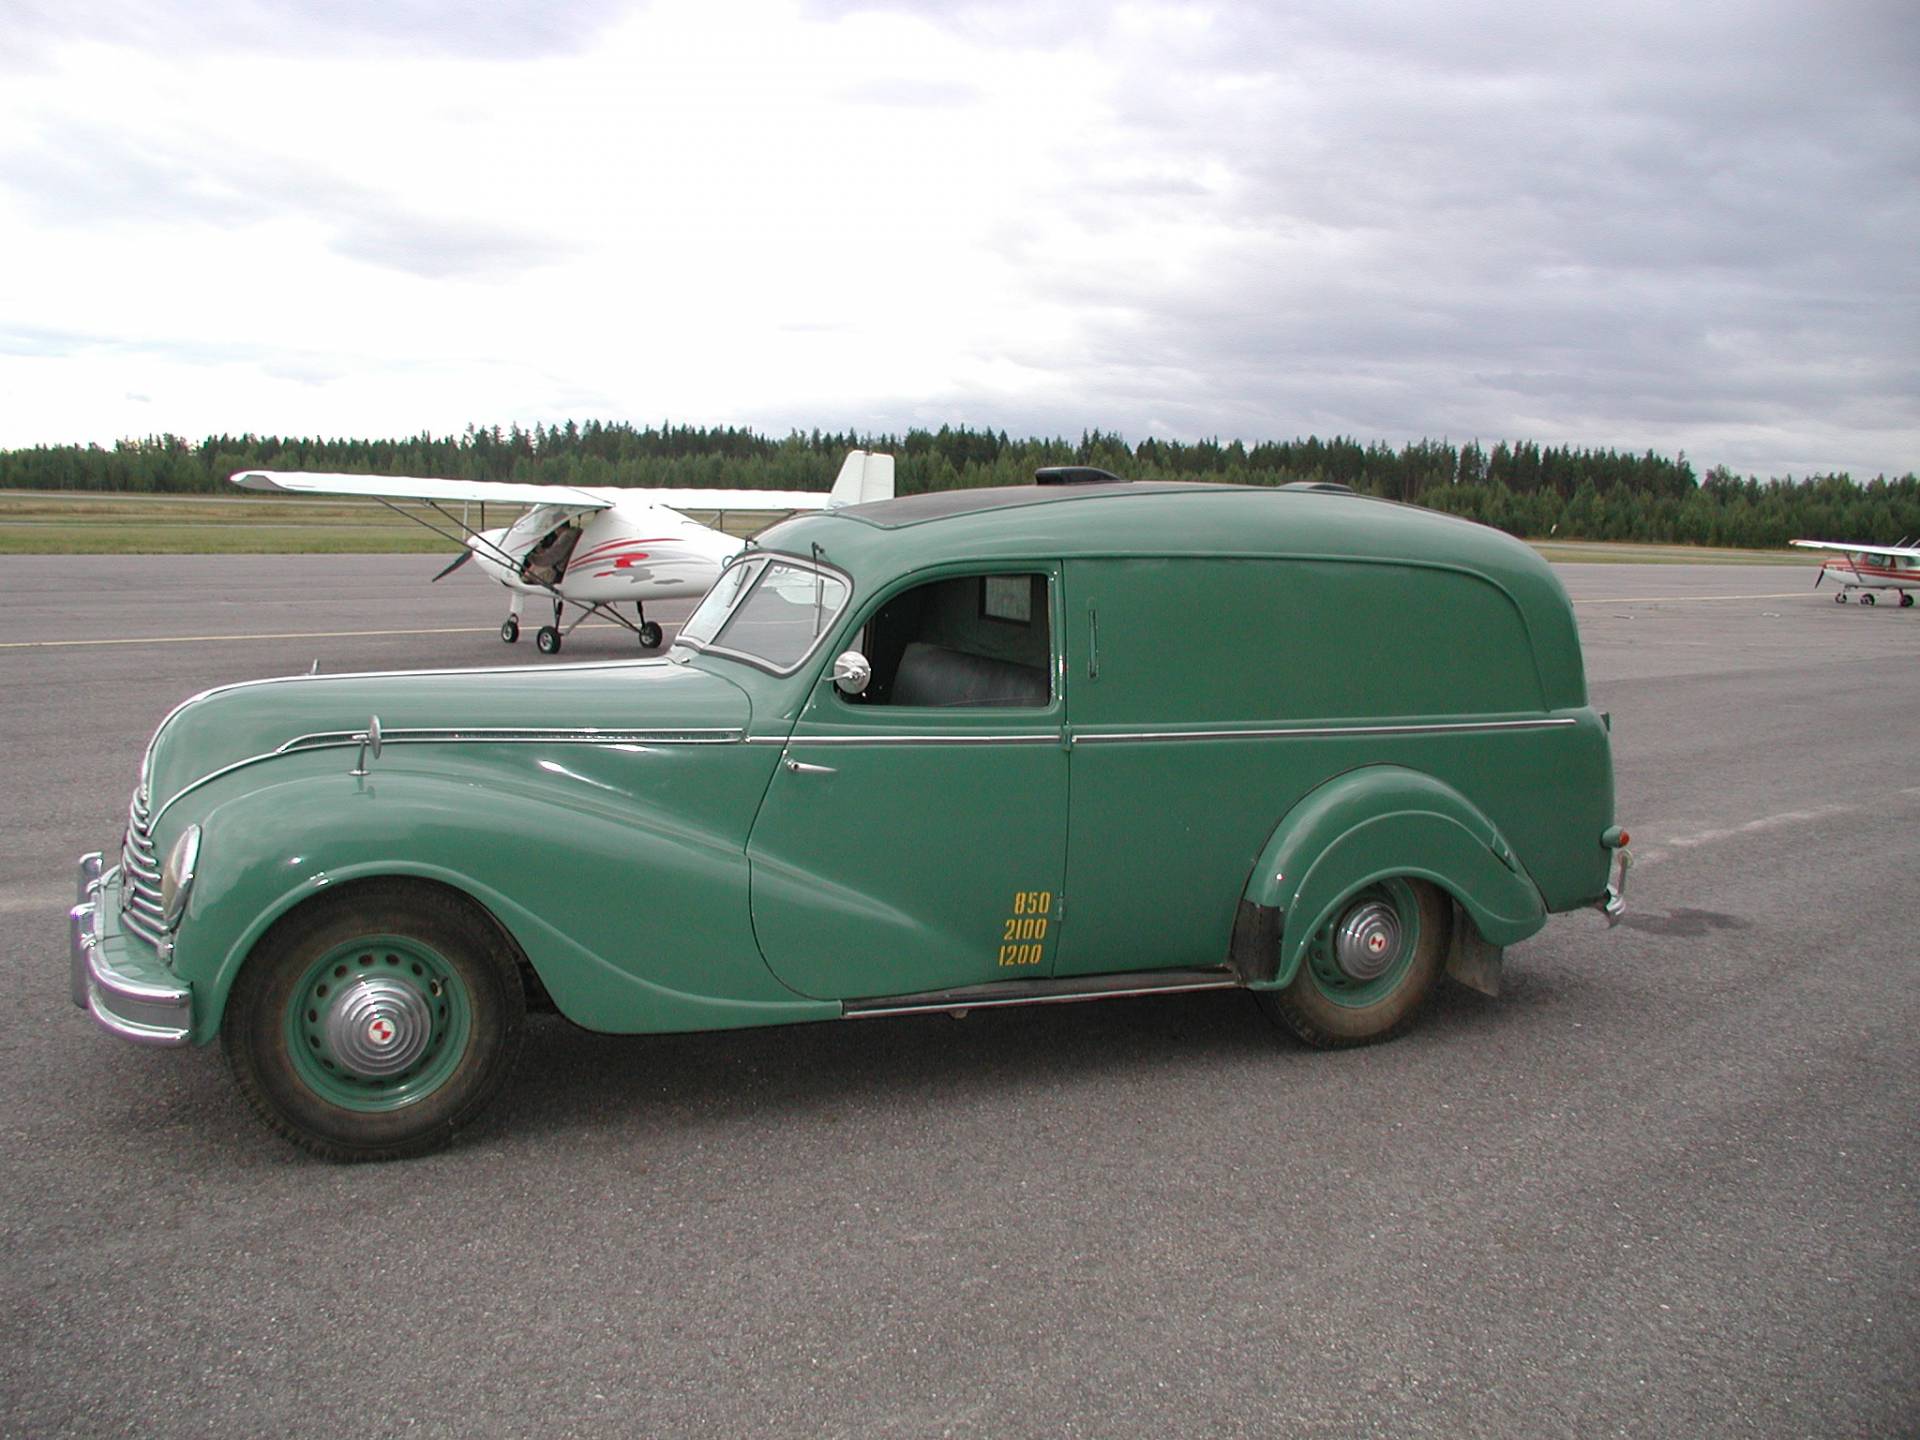 For Sale: EMW 340-7 (1954) offered for GBP 36,203